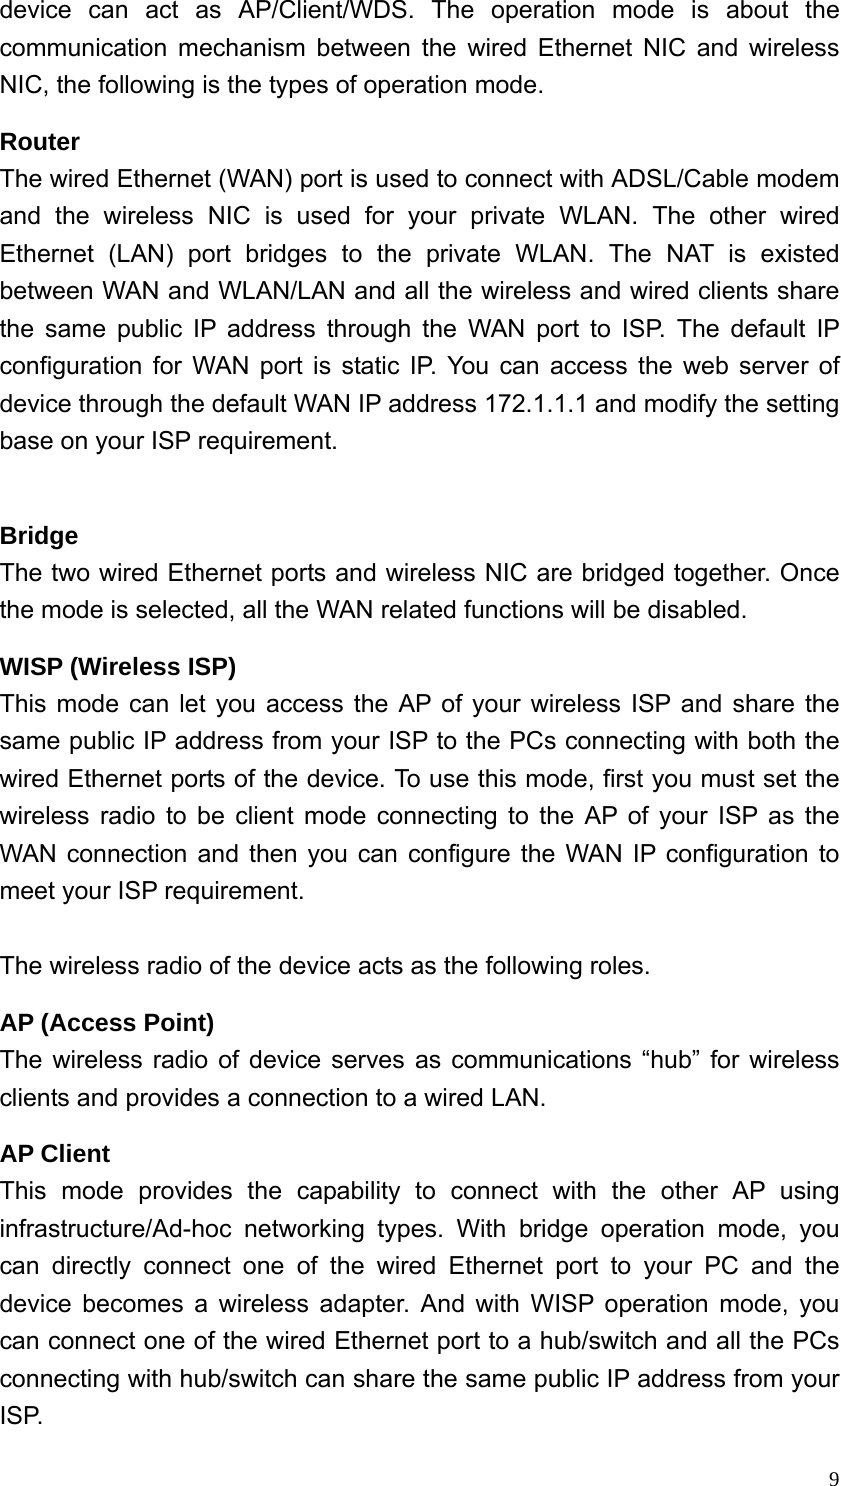  9device can act as AP/Client/WDS. The operation mode is about the communication mechanism between the wired Ethernet NIC and wireless NIC, the following is the types of operation mode. Router The wired Ethernet (WAN) port is used to connect with ADSL/Cable modem and the wireless NIC is used for your private WLAN. The other wired Ethernet (LAN) port bridges to the private WLAN. The NAT is existed between WAN and WLAN/LAN and all the wireless and wired clients share the same public IP address through the WAN port to ISP. The default IP configuration for WAN port is static IP. You can access the web server of device through the default WAN IP address 172.1.1.1 and modify the setting base on your ISP requirement.    Bridge The two wired Ethernet ports and wireless NIC are bridged together. Once the mode is selected, all the WAN related functions will be disabled. WISP (Wireless ISP) This mode can let you access the AP of your wireless ISP and share the same public IP address from your ISP to the PCs connecting with both the wired Ethernet ports of the device. To use this mode, first you must set the wireless radio to be client mode connecting to the AP of your ISP as the WAN connection and then you can configure the WAN IP configuration to meet your ISP requirement.  The wireless radio of the device acts as the following roles. AP (Access Point) The wireless radio of device serves as communications “hub” for wireless clients and provides a connection to a wired LAN. AP Client This mode provides the capability to connect with the other AP using infrastructure/Ad-hoc networking types. With bridge operation mode, you can directly connect one of the wired Ethernet port to your PC and the device becomes a wireless adapter. And with WISP operation mode, you can connect one of the wired Ethernet port to a hub/switch and all the PCs connecting with hub/switch can share the same public IP address from your ISP. 